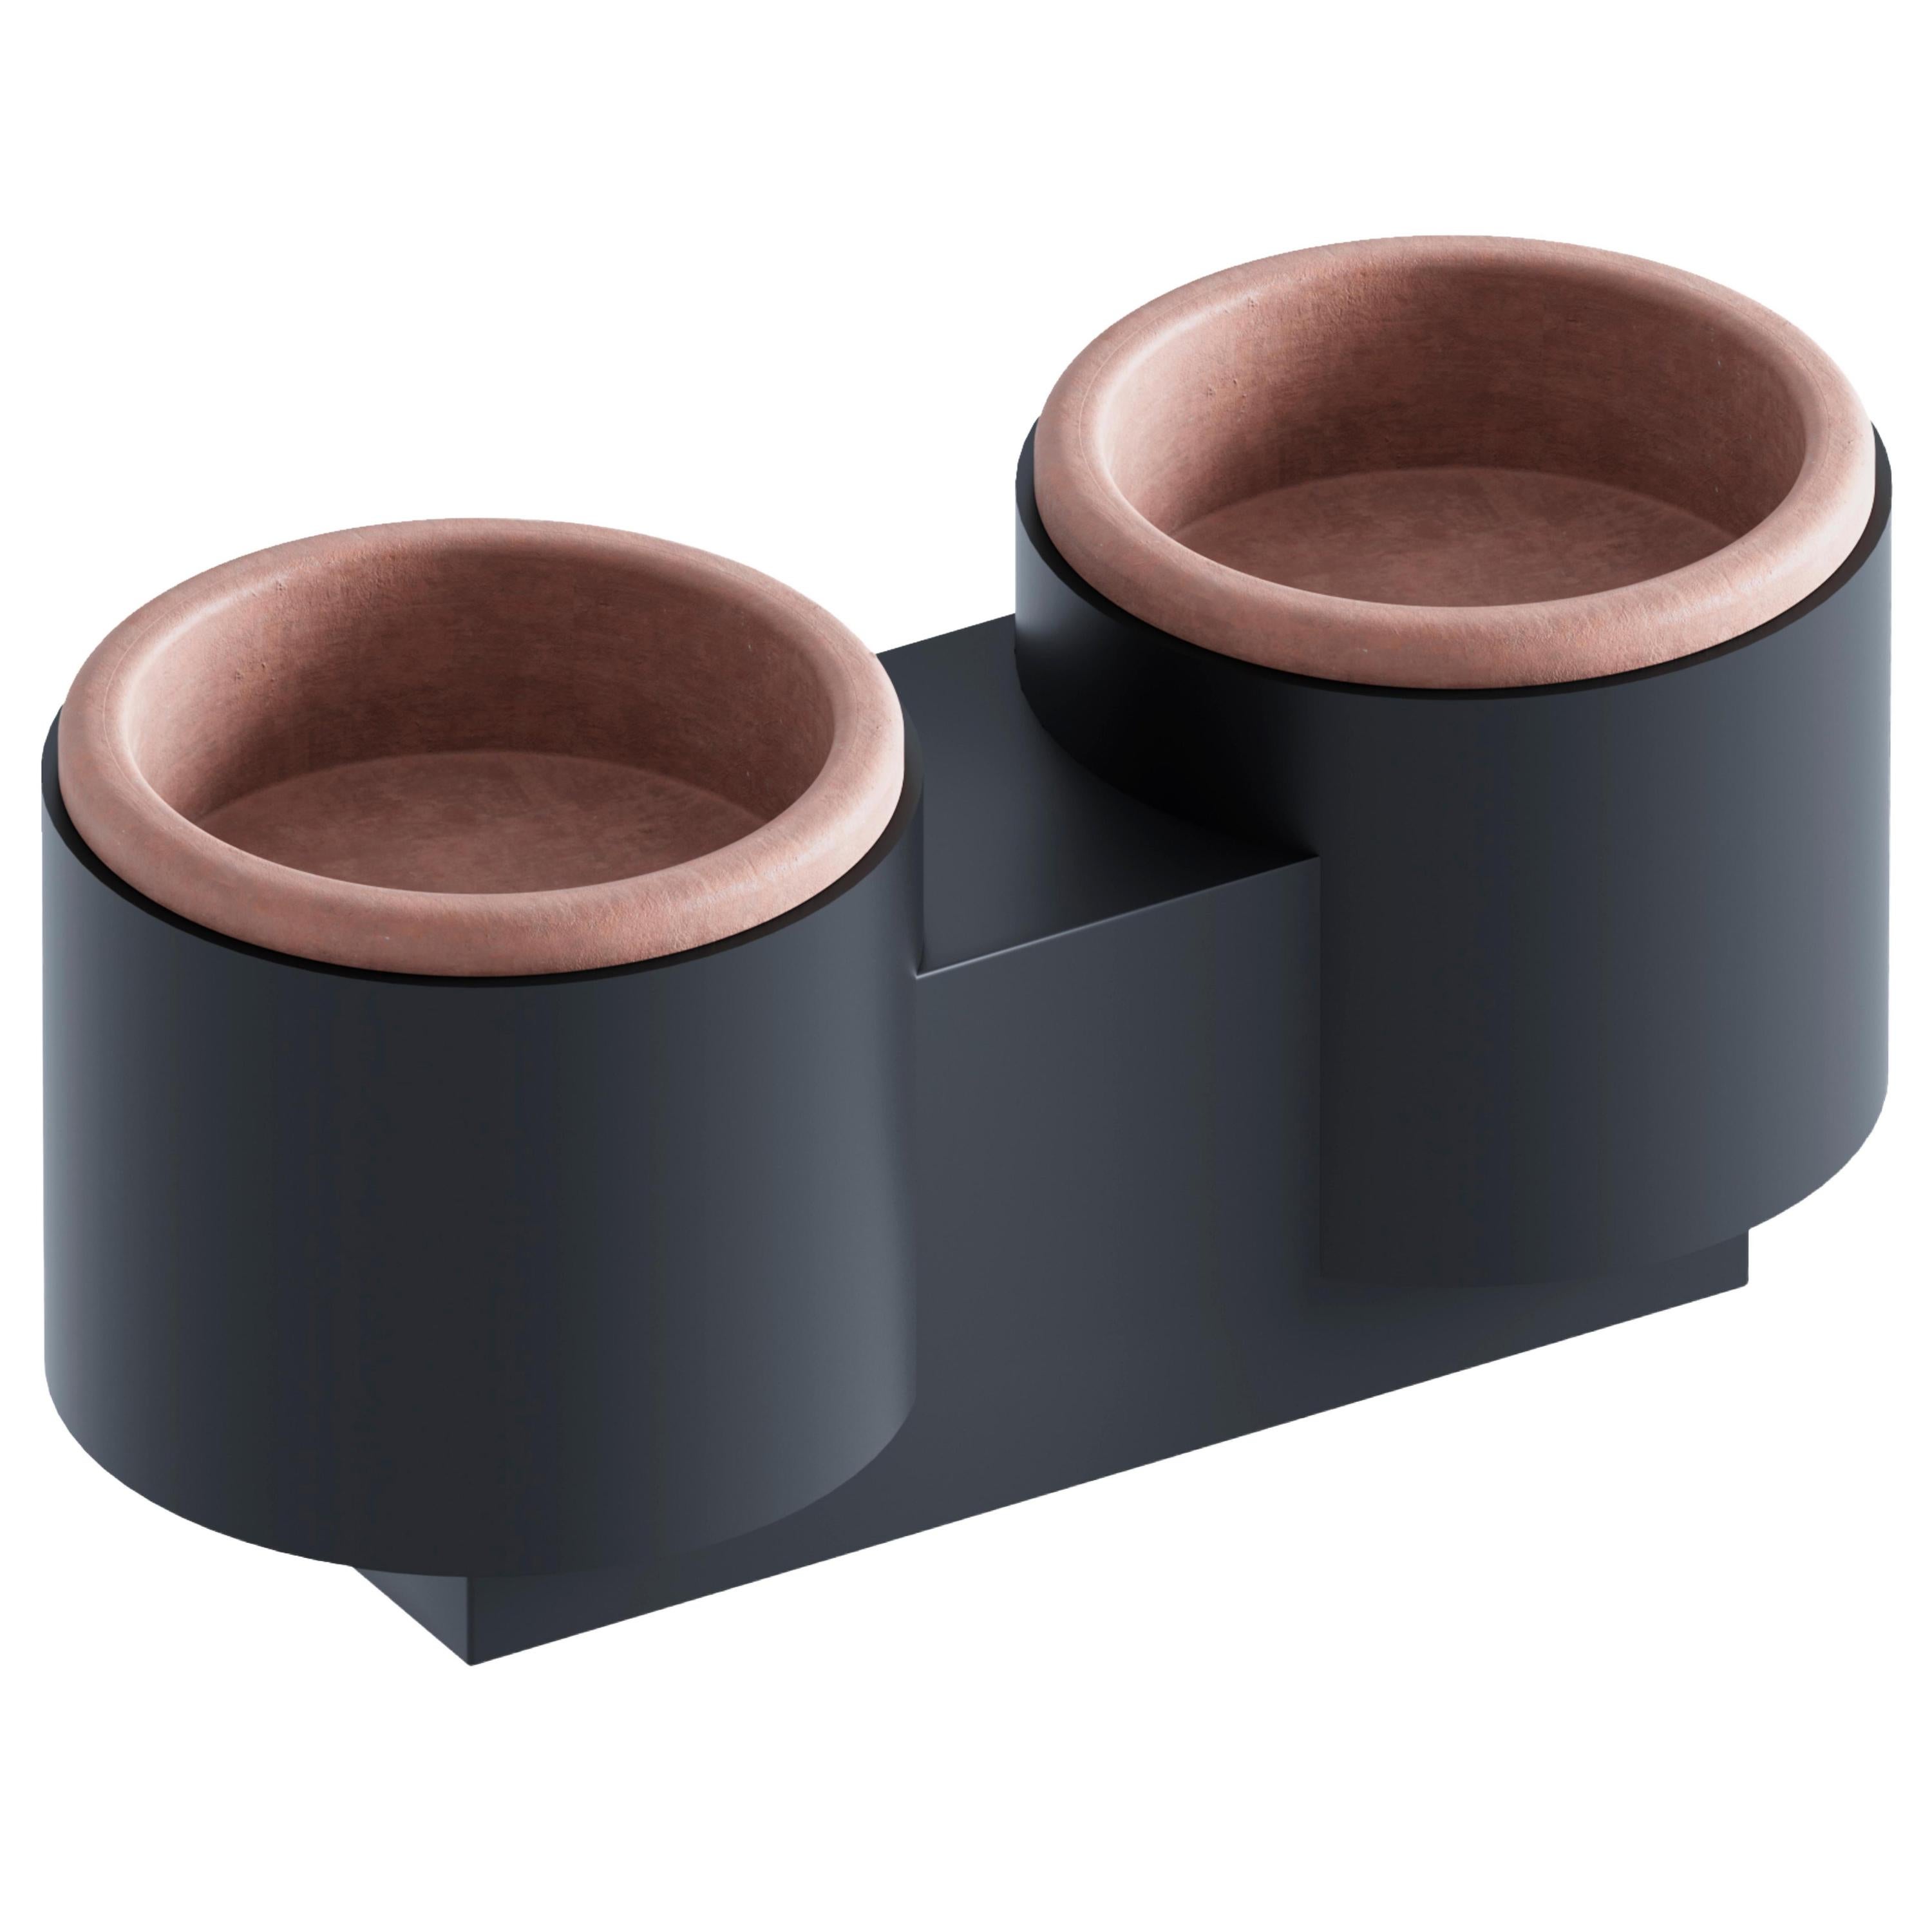 Pet Bowls "Qubo" in Noir Black and Terracotta For Sale